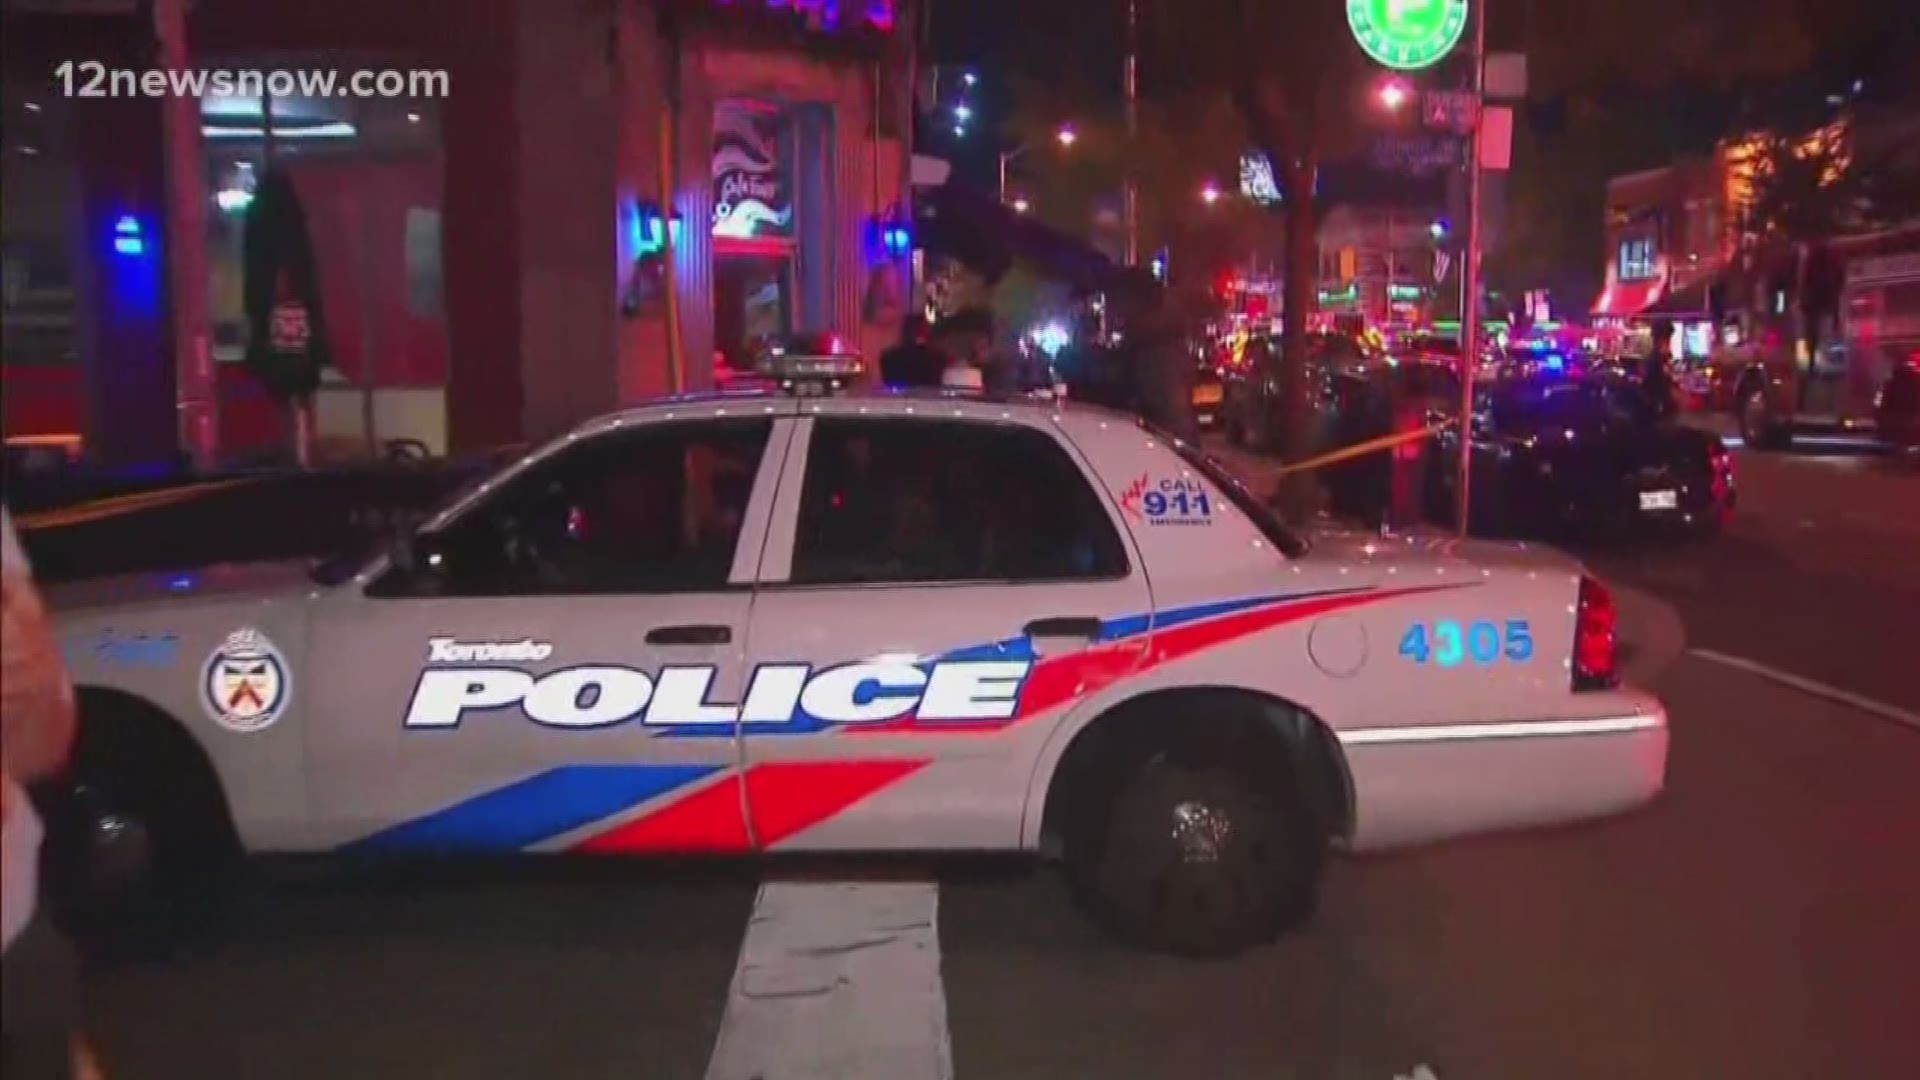 Toronto police are seeking video and photos from people and businesses in the area where a gunman killed a woman and shot 13 other people in the Greektown neighborhood.